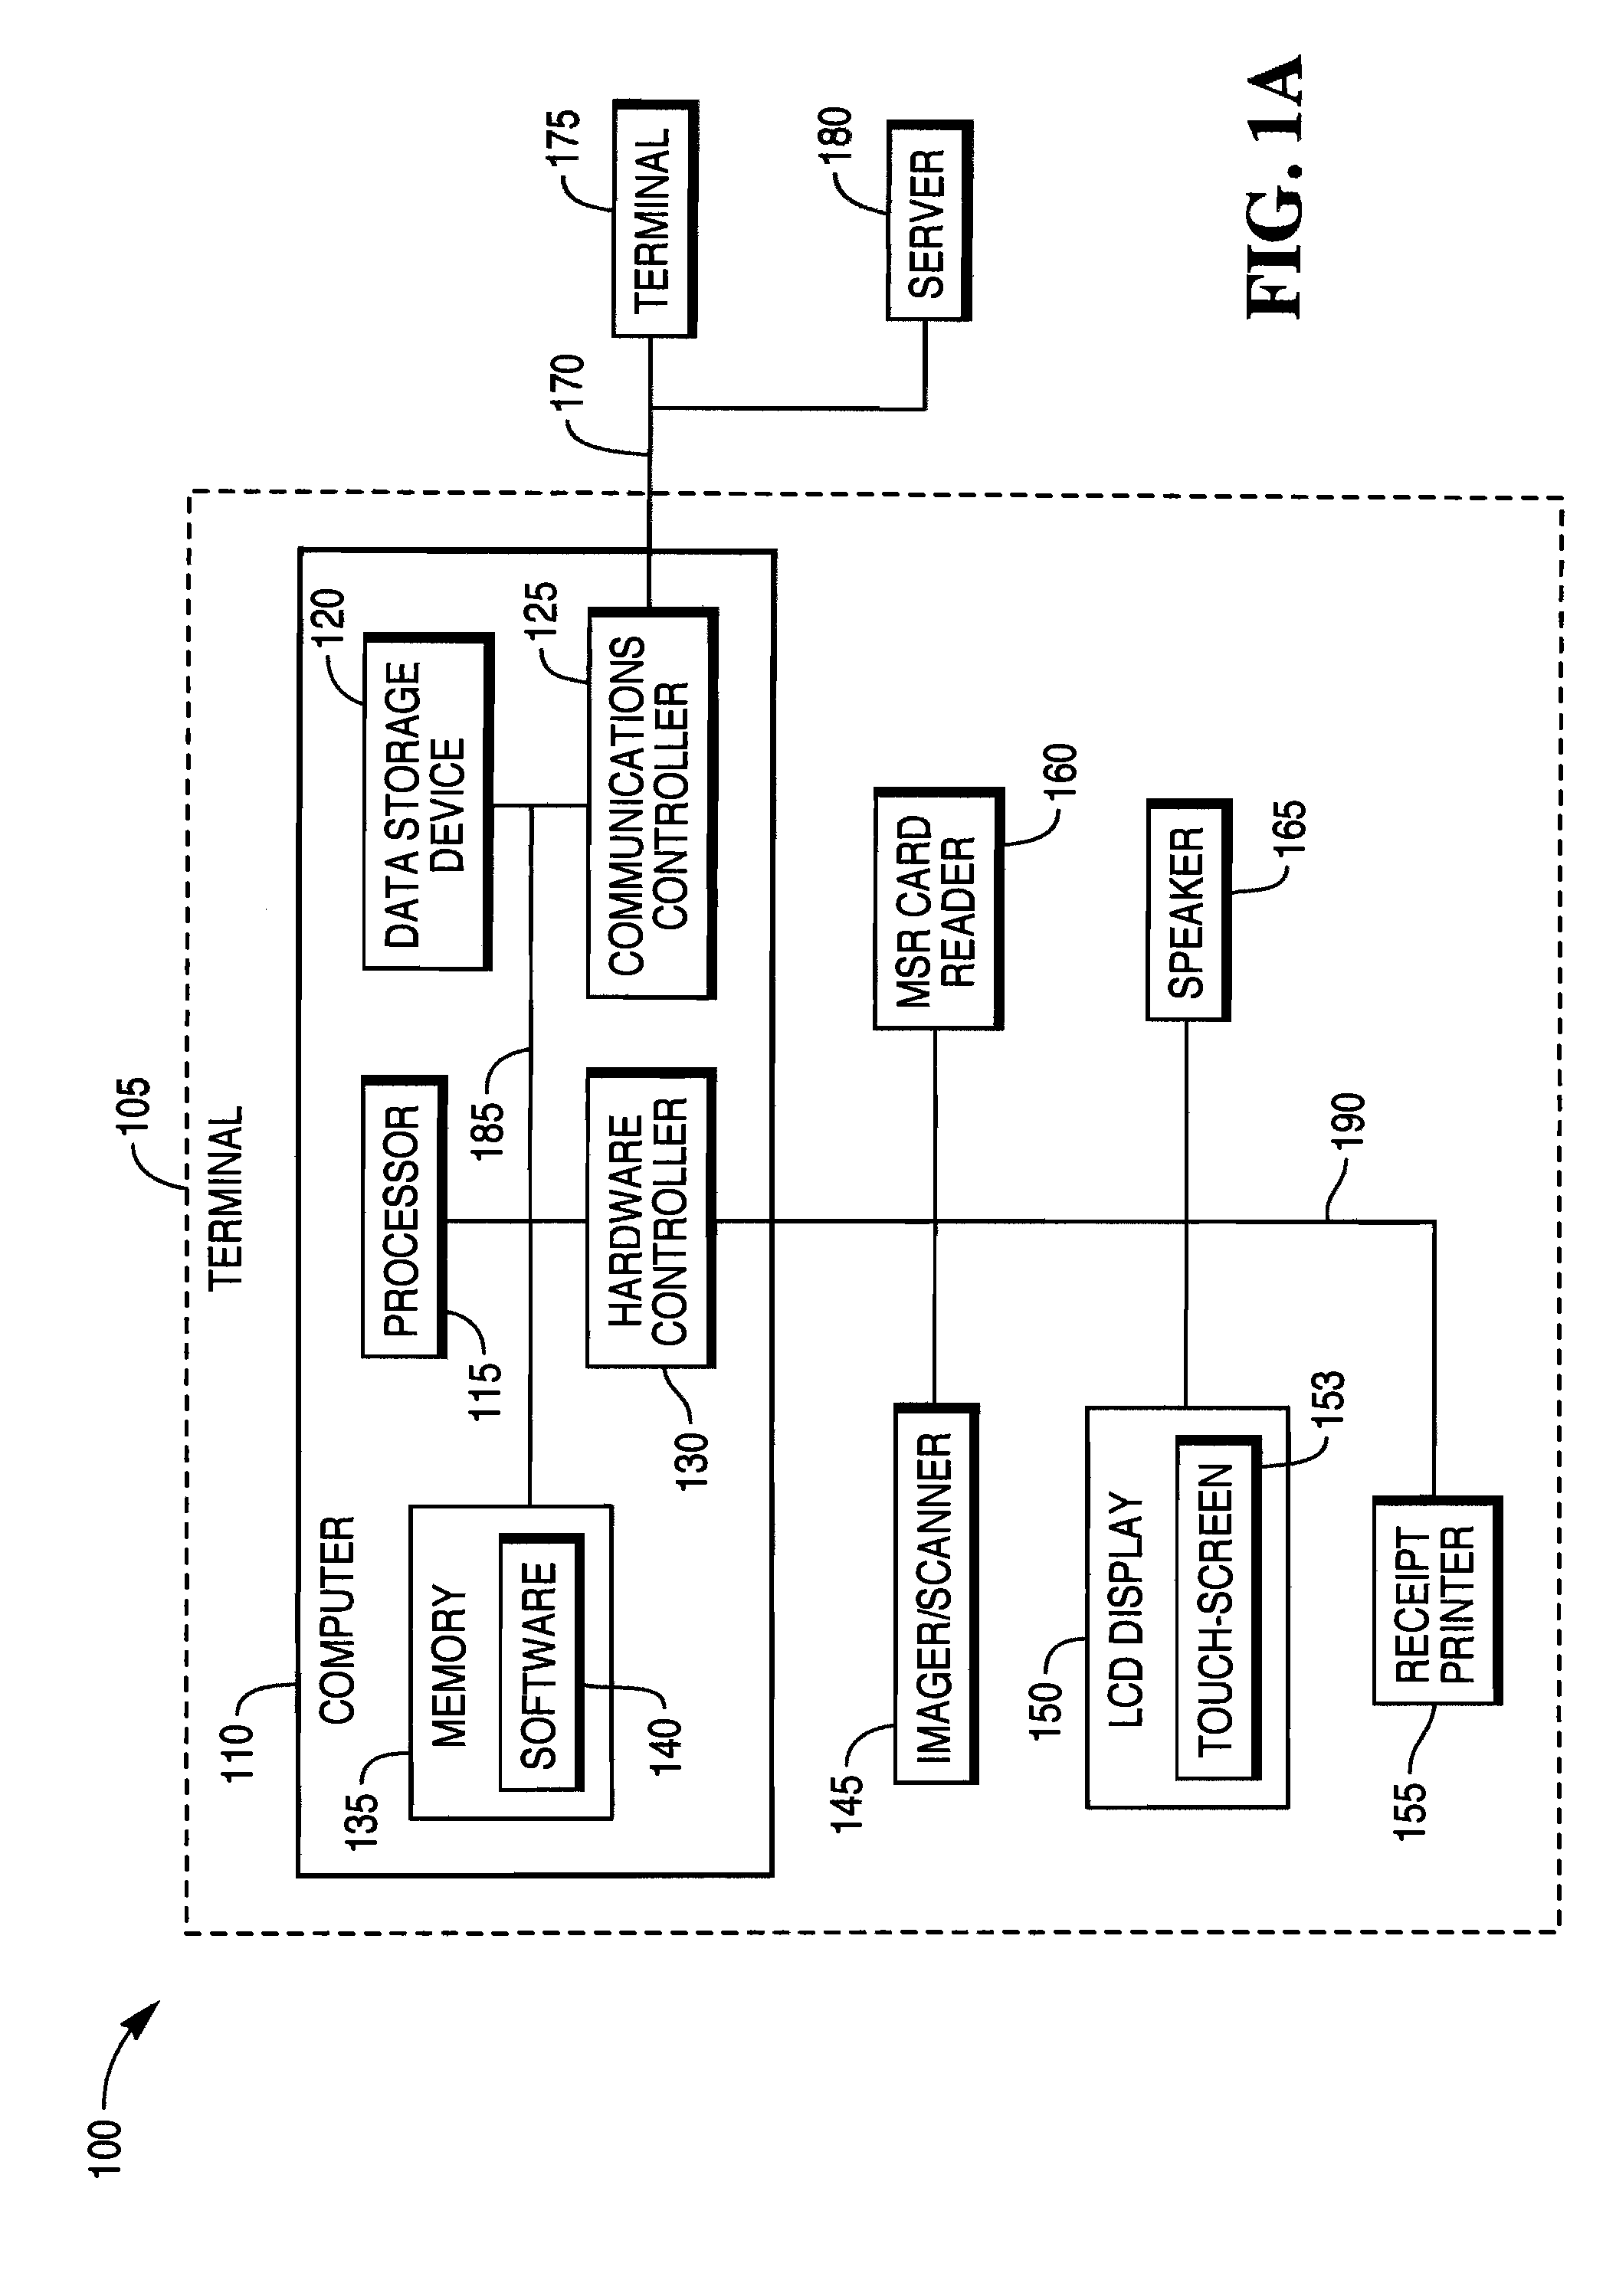 System, method and apparatus for implementing an improved user interface on a kiosk